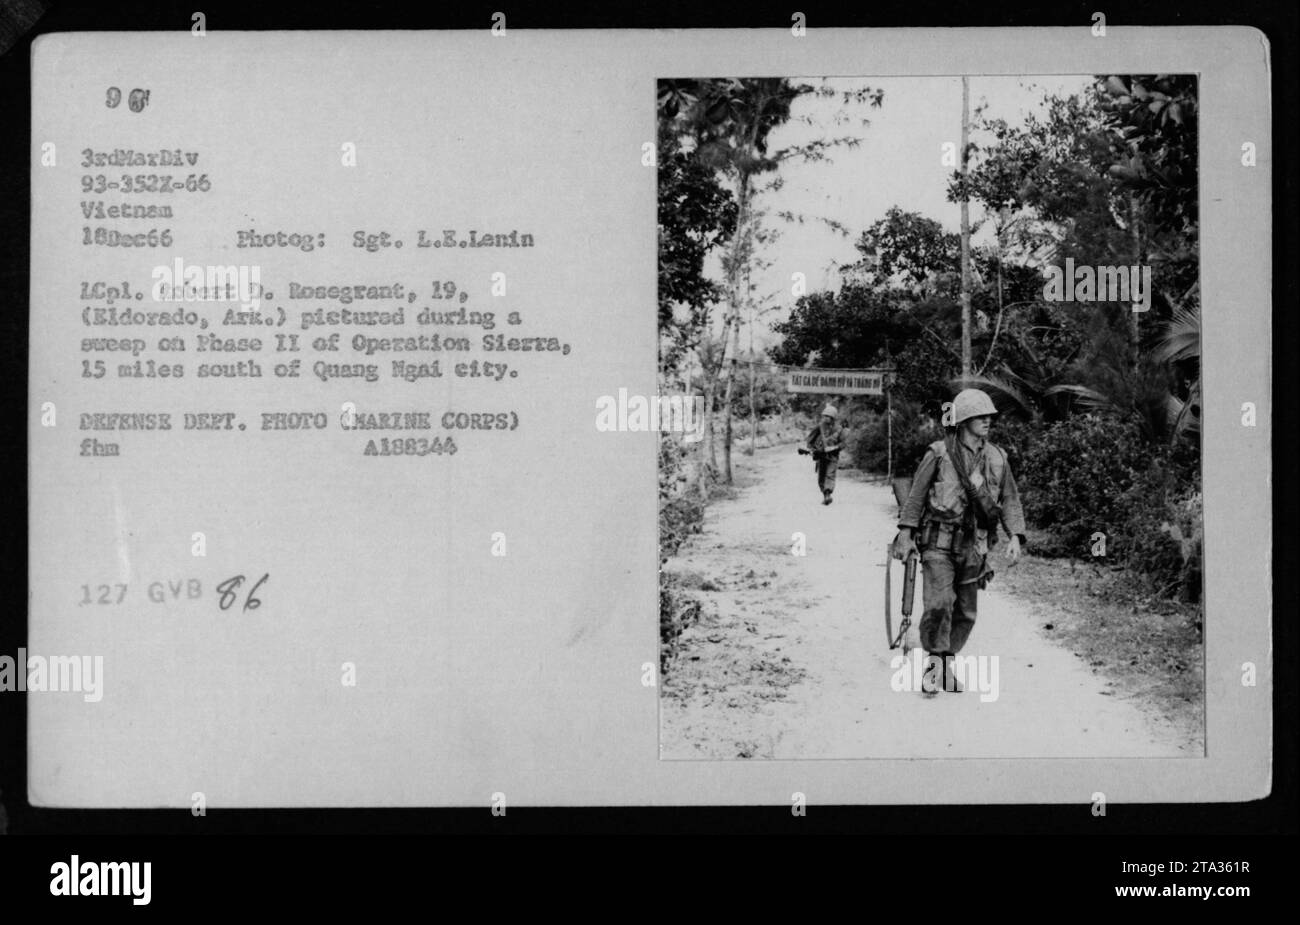 LCpl. Robert D. Rosegrant, 19, from Eldorado, Arkansas, can be seen in this image during a sweep on Phase II of Operation Sierra, located 15 miles south of Quang Ngai city. The photograph was taken on December 18, 1966, during the Vietnam War by Sgt. L.E. Lenin, a photographer of the Marine Corps. Stock Photo